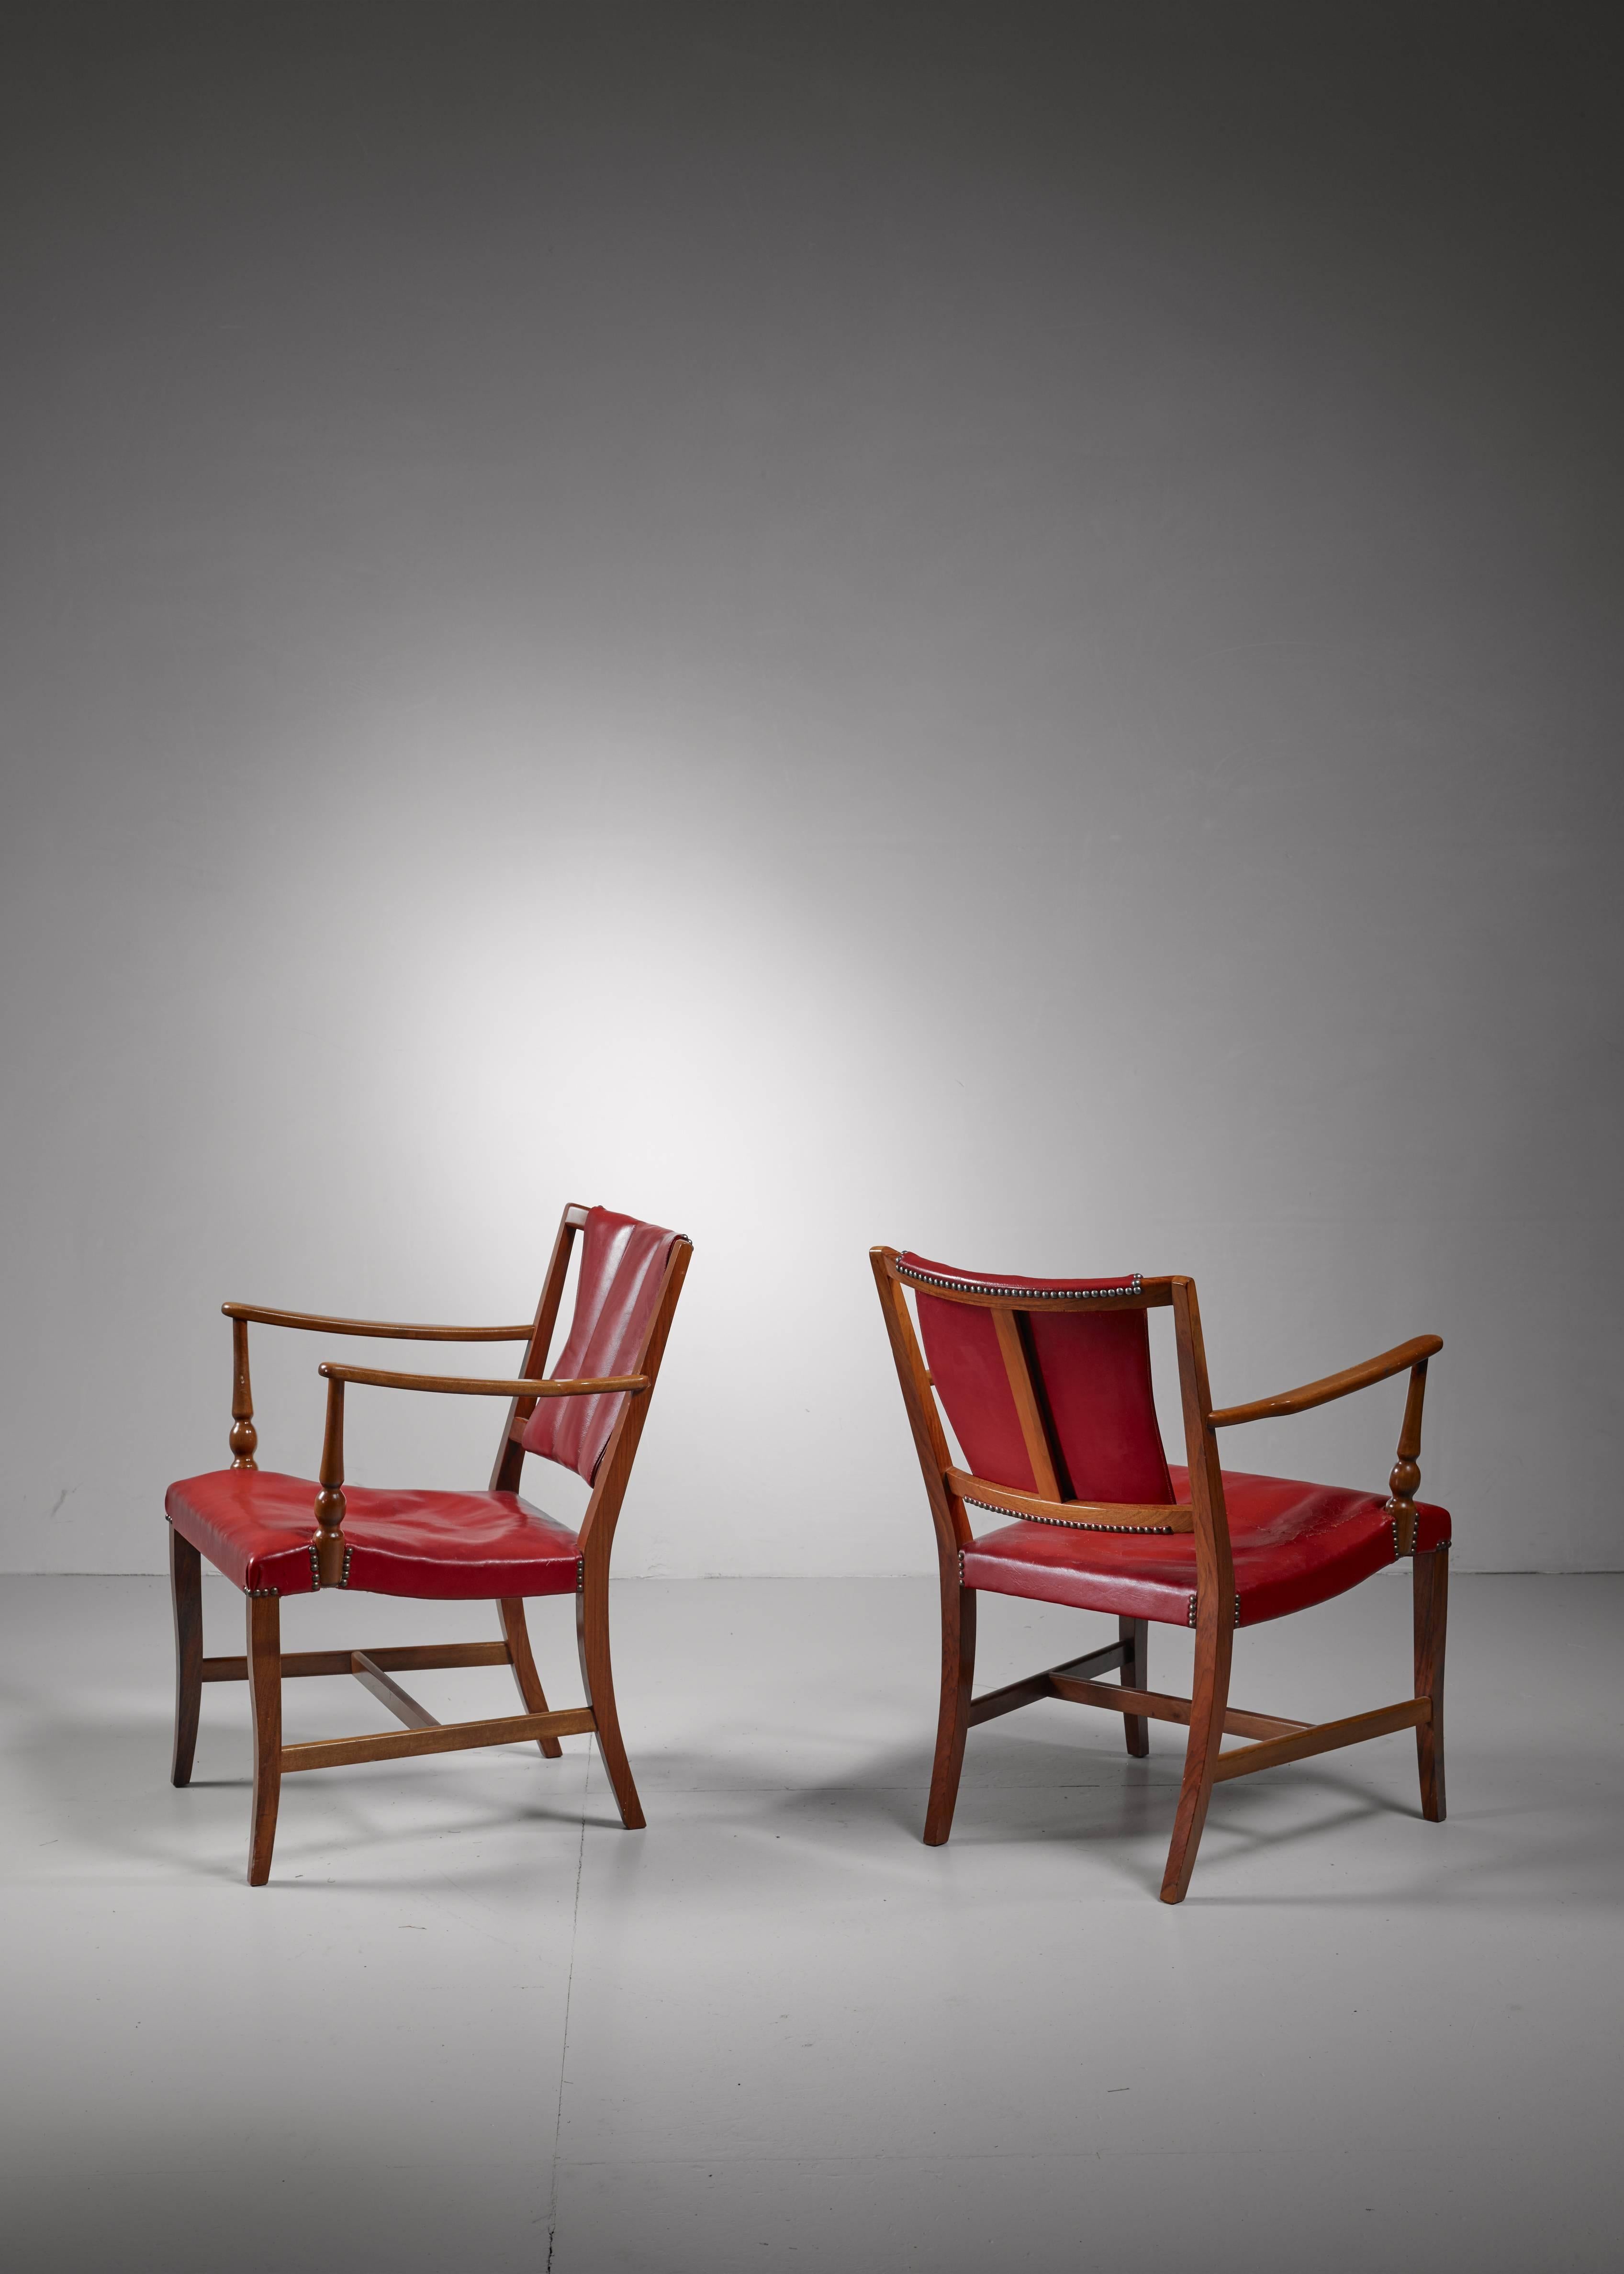 A pair of armchairs designed in 1948 by Josef Frank for Svenskt Tenn. These model 2067 chairs are made of cherry wood with a red leather seating and backrest.

*This pair is curated for you by Bloomberry *